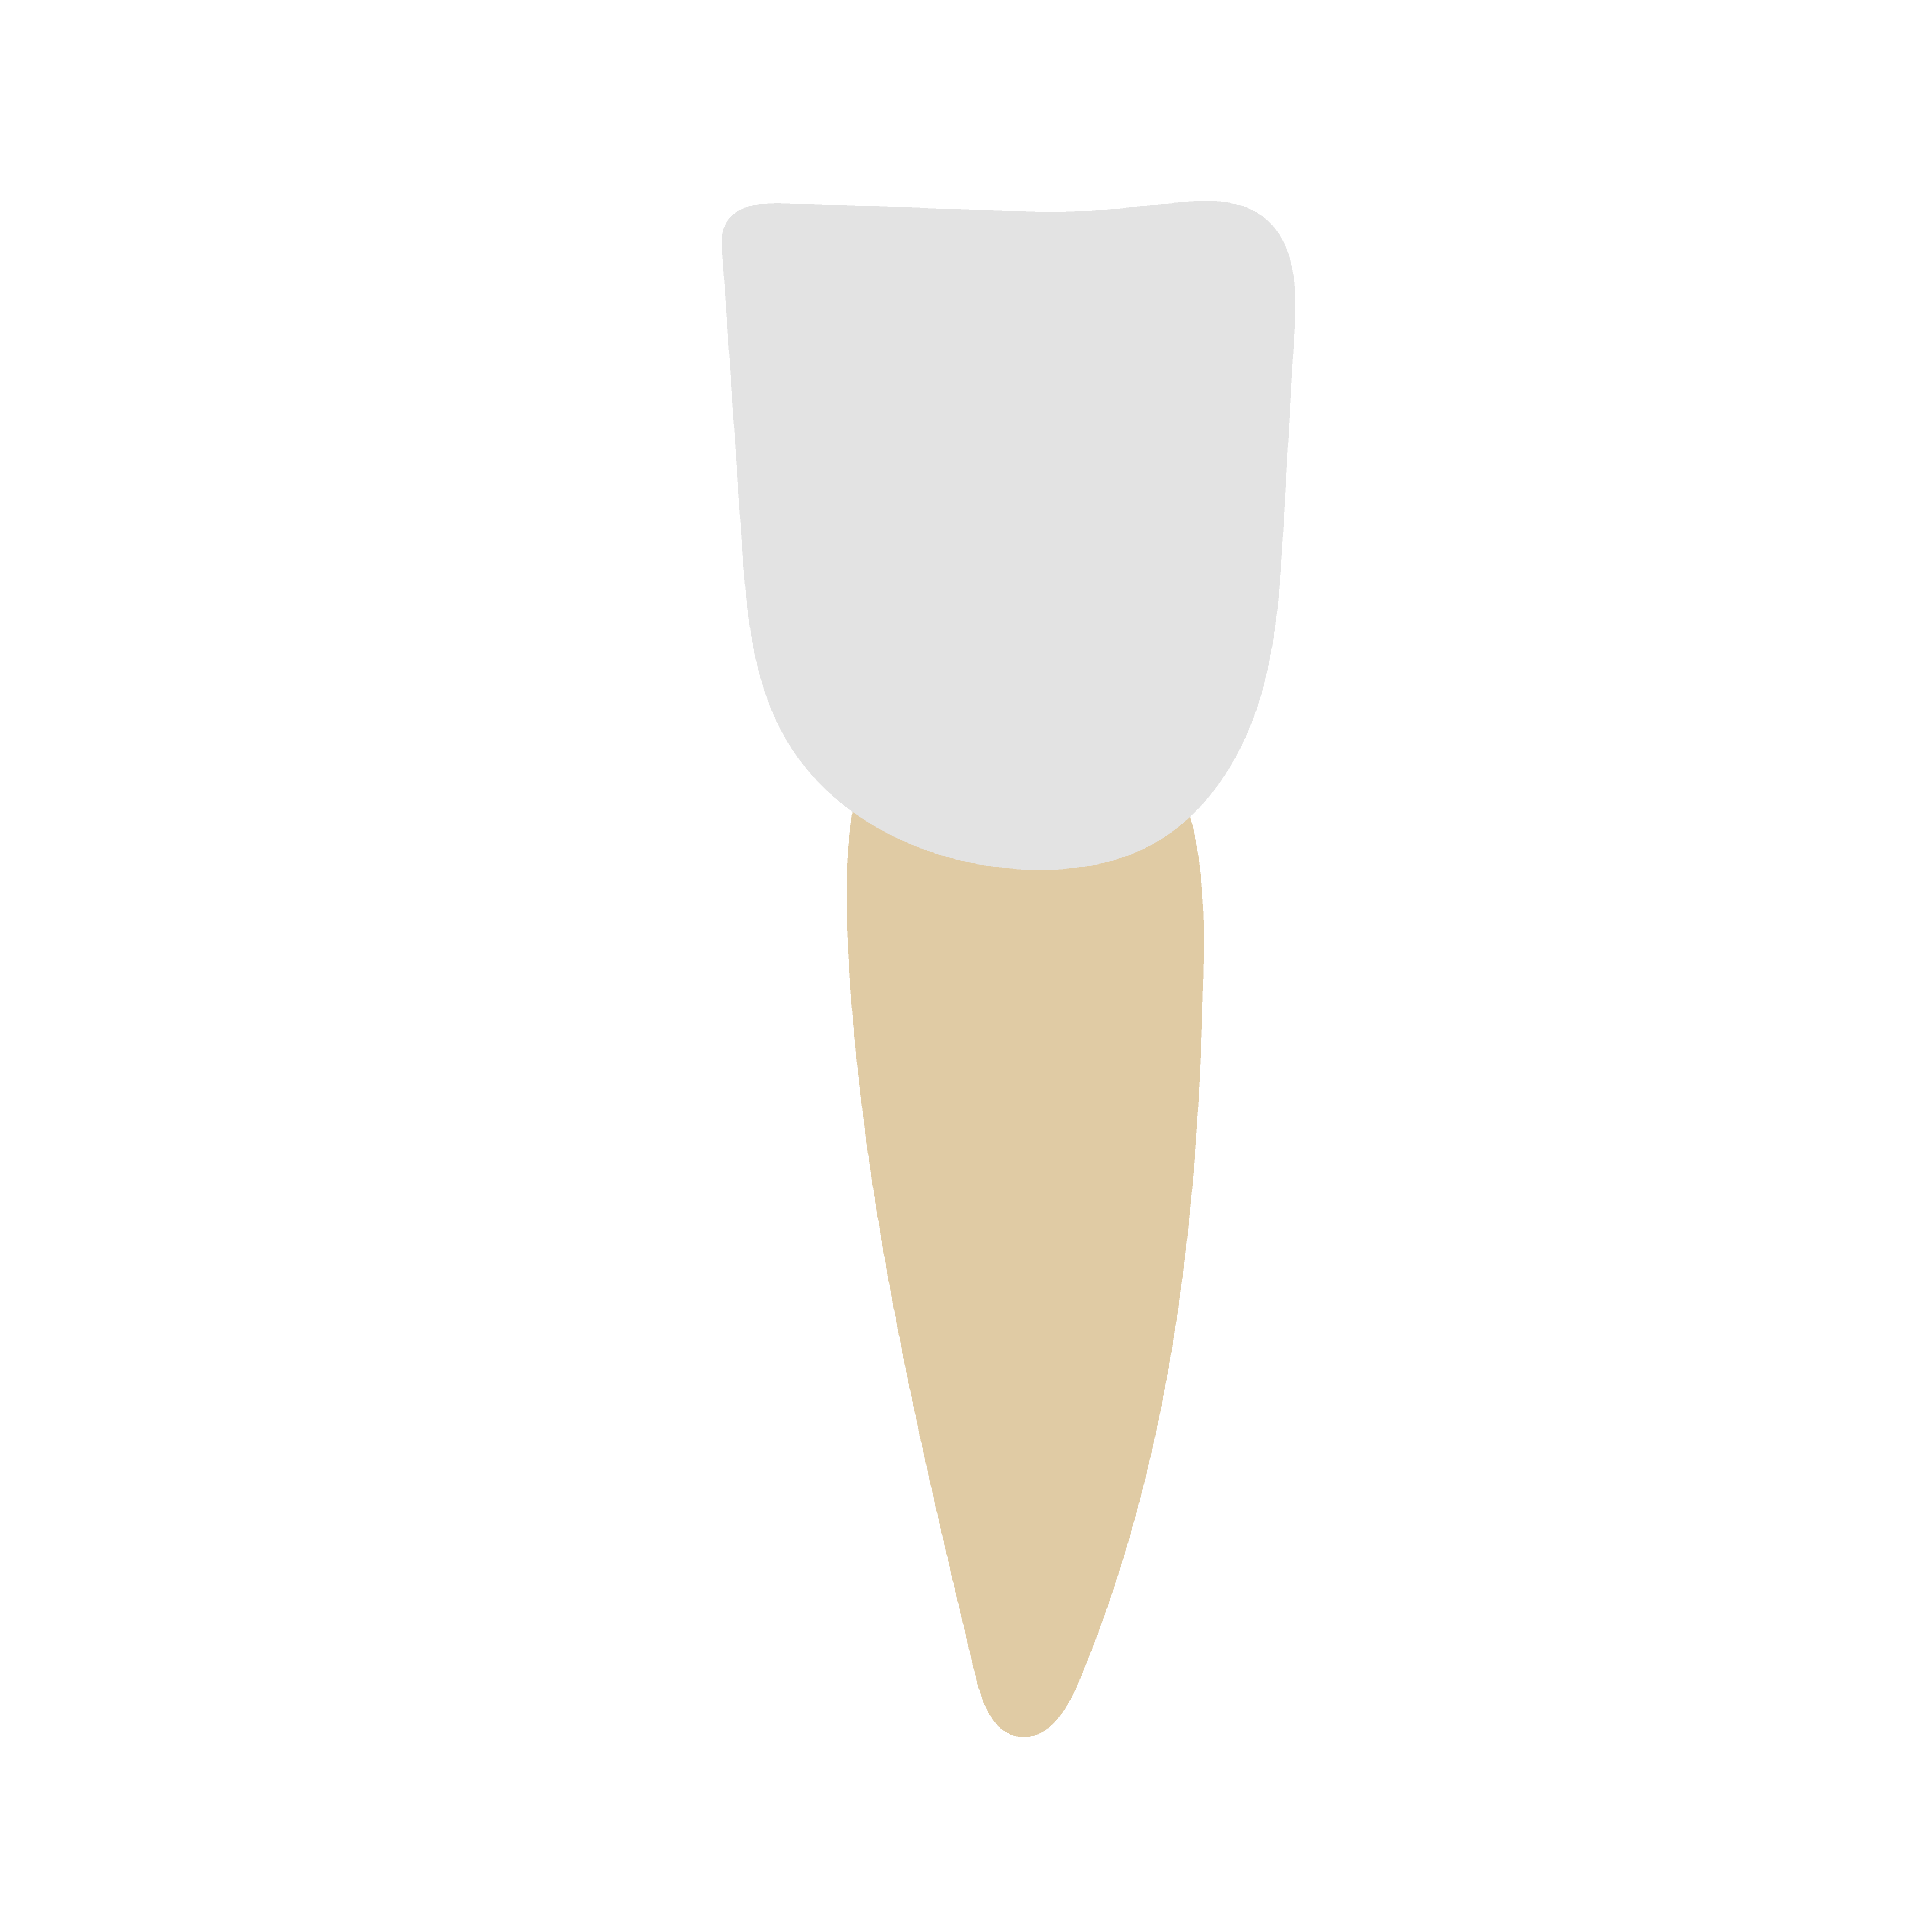 Science; Animals, including humans; KS2 Year 4; Animal teeth and their functions